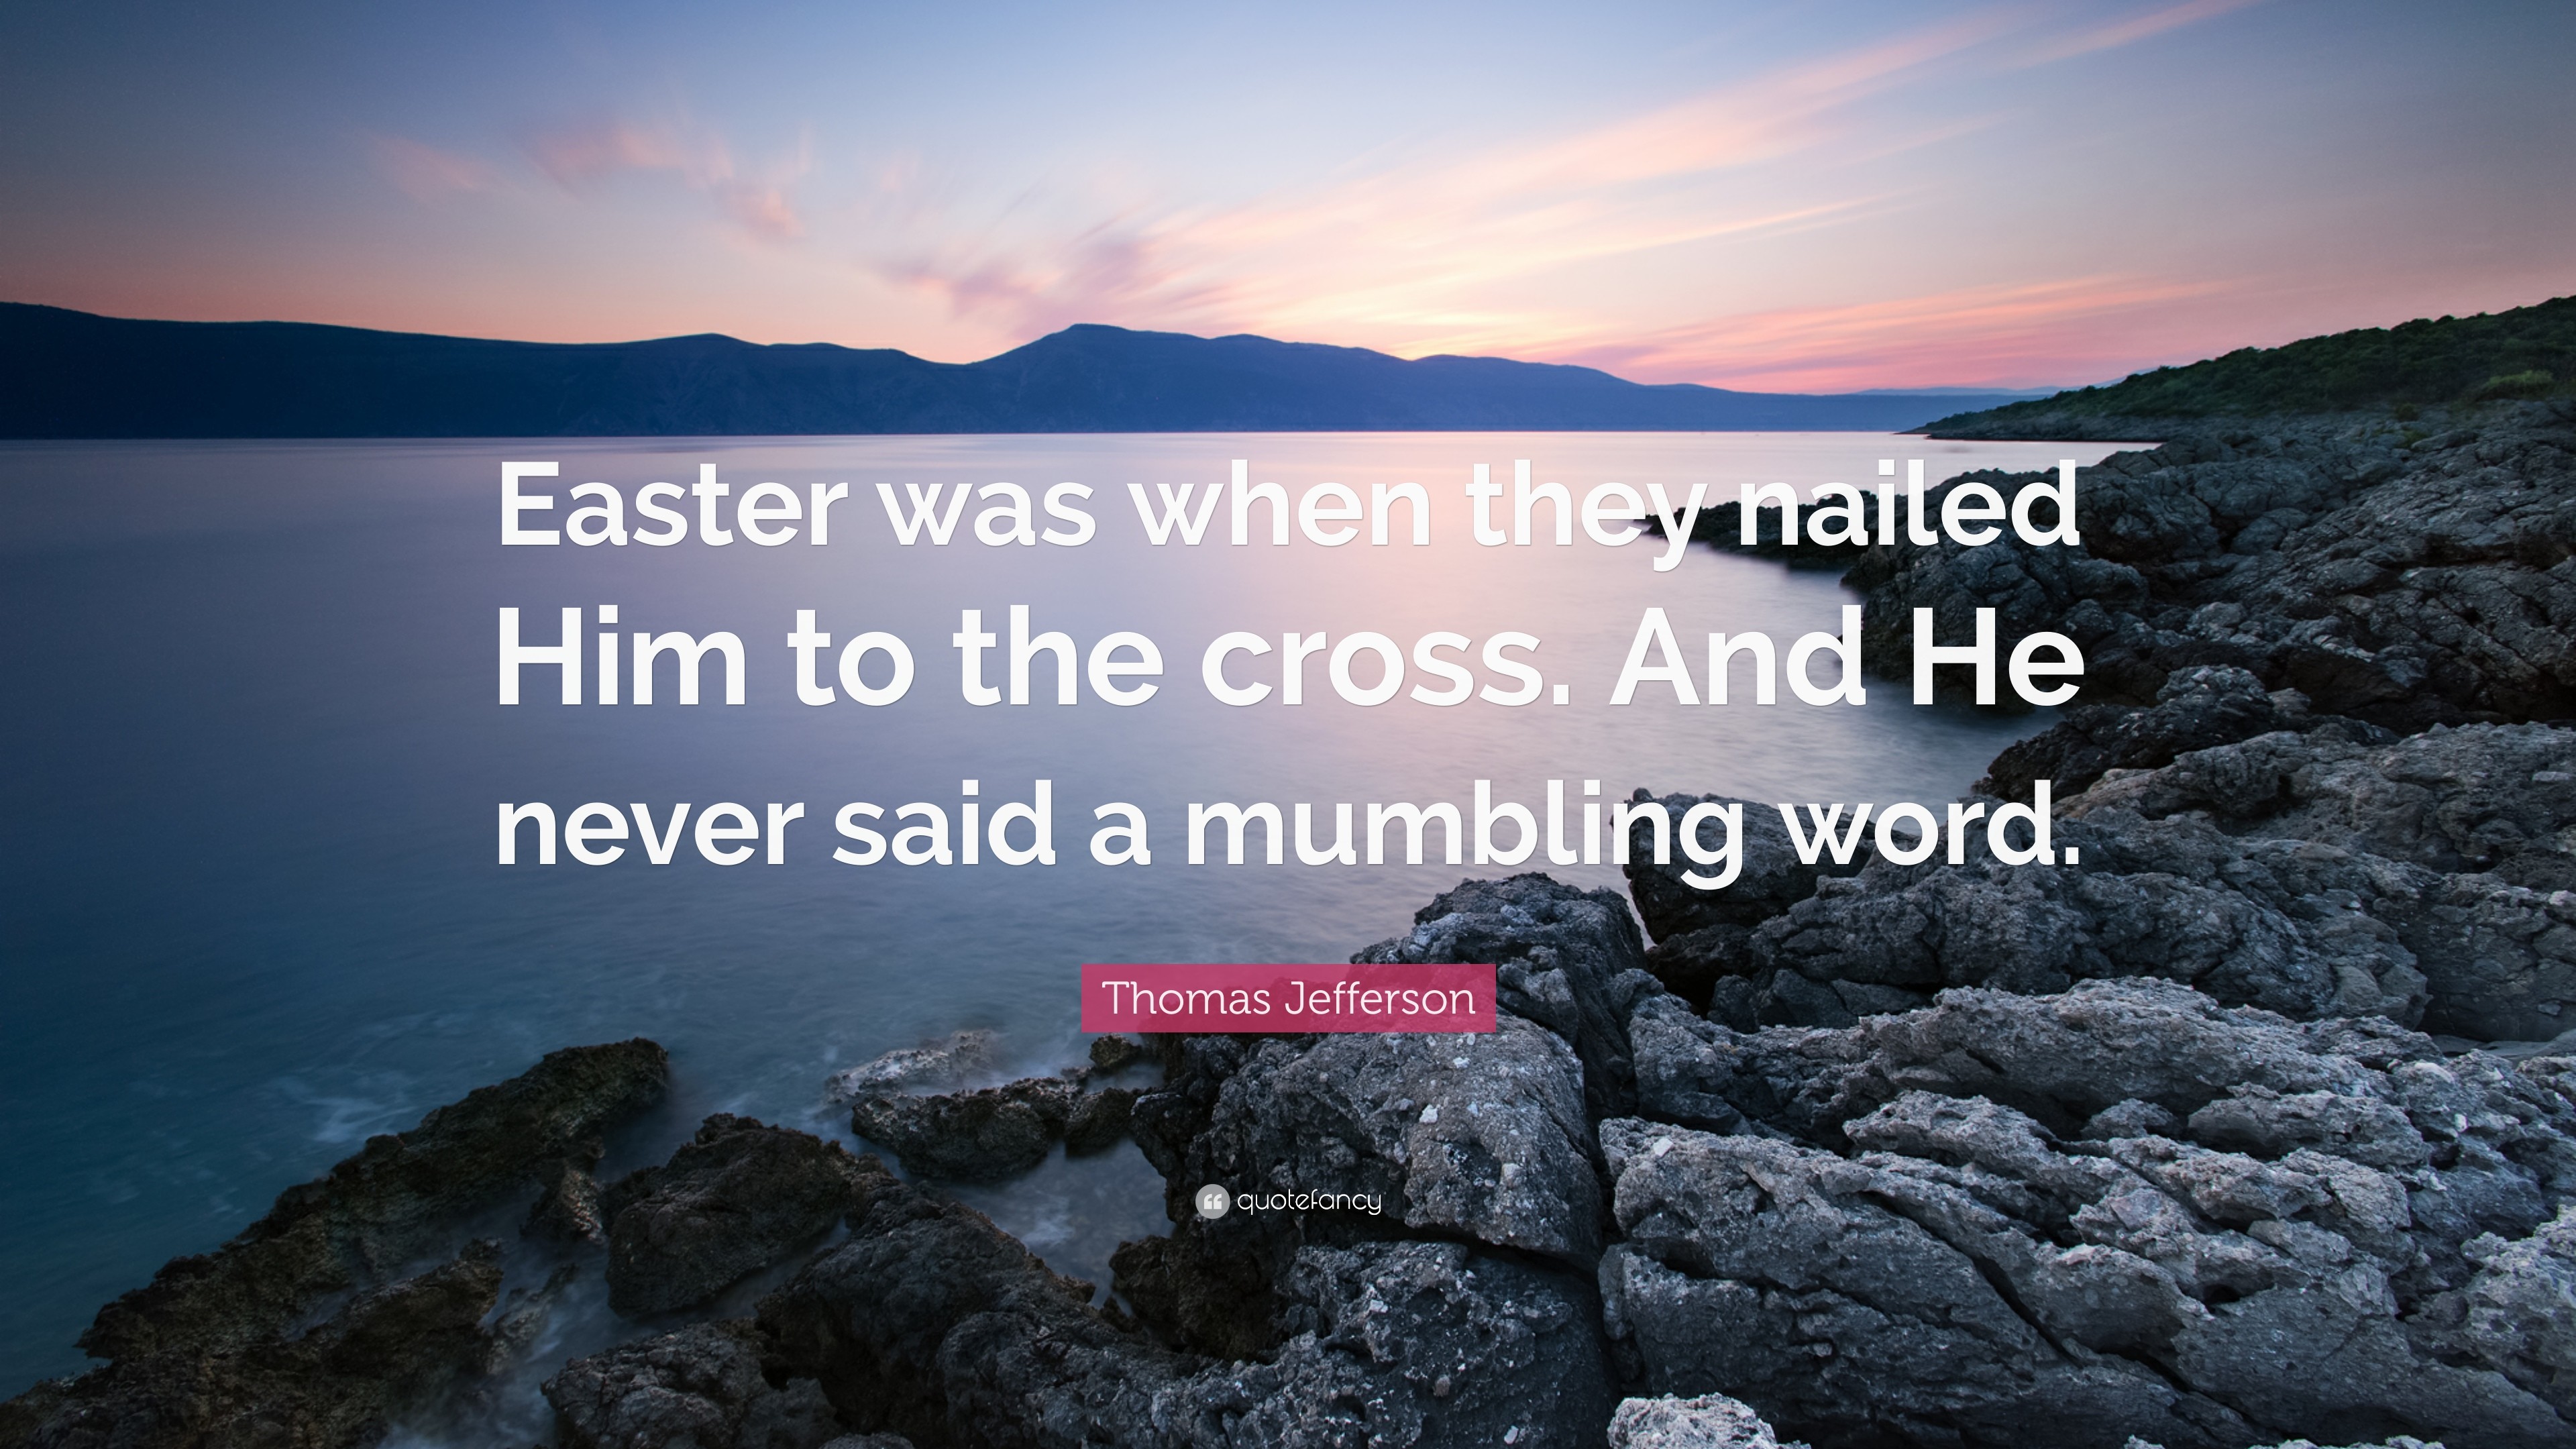 3840x2160 Thomas Jefferson Quote: “Easter was when they nailed Him to the cross. And